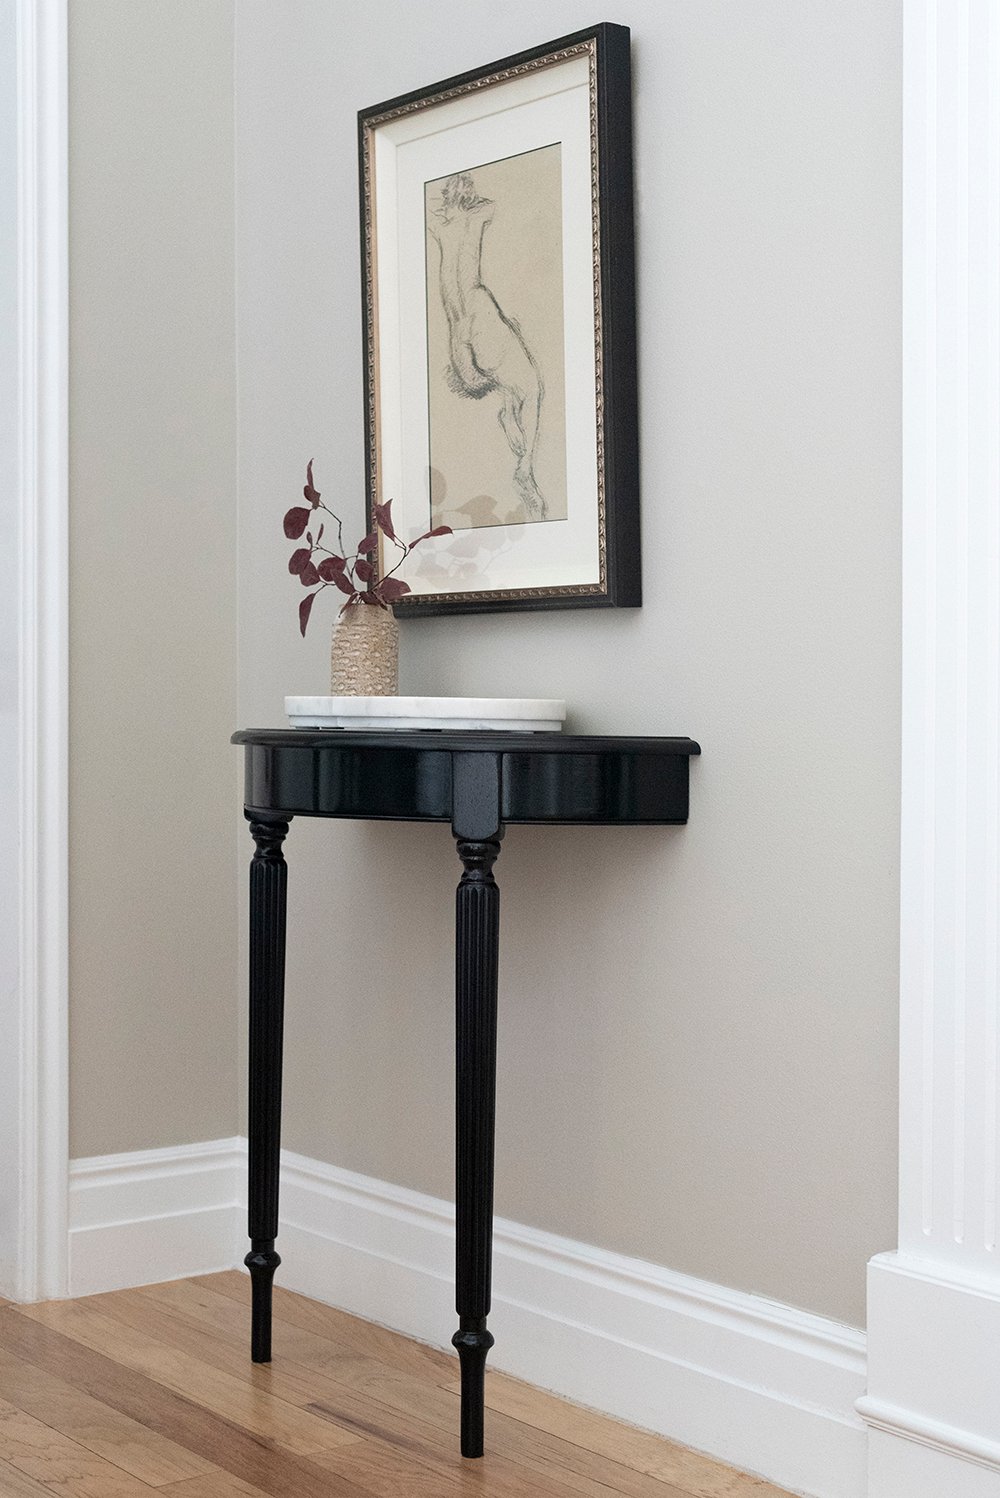 Demilune Table Makeover - roomfortuesday.com